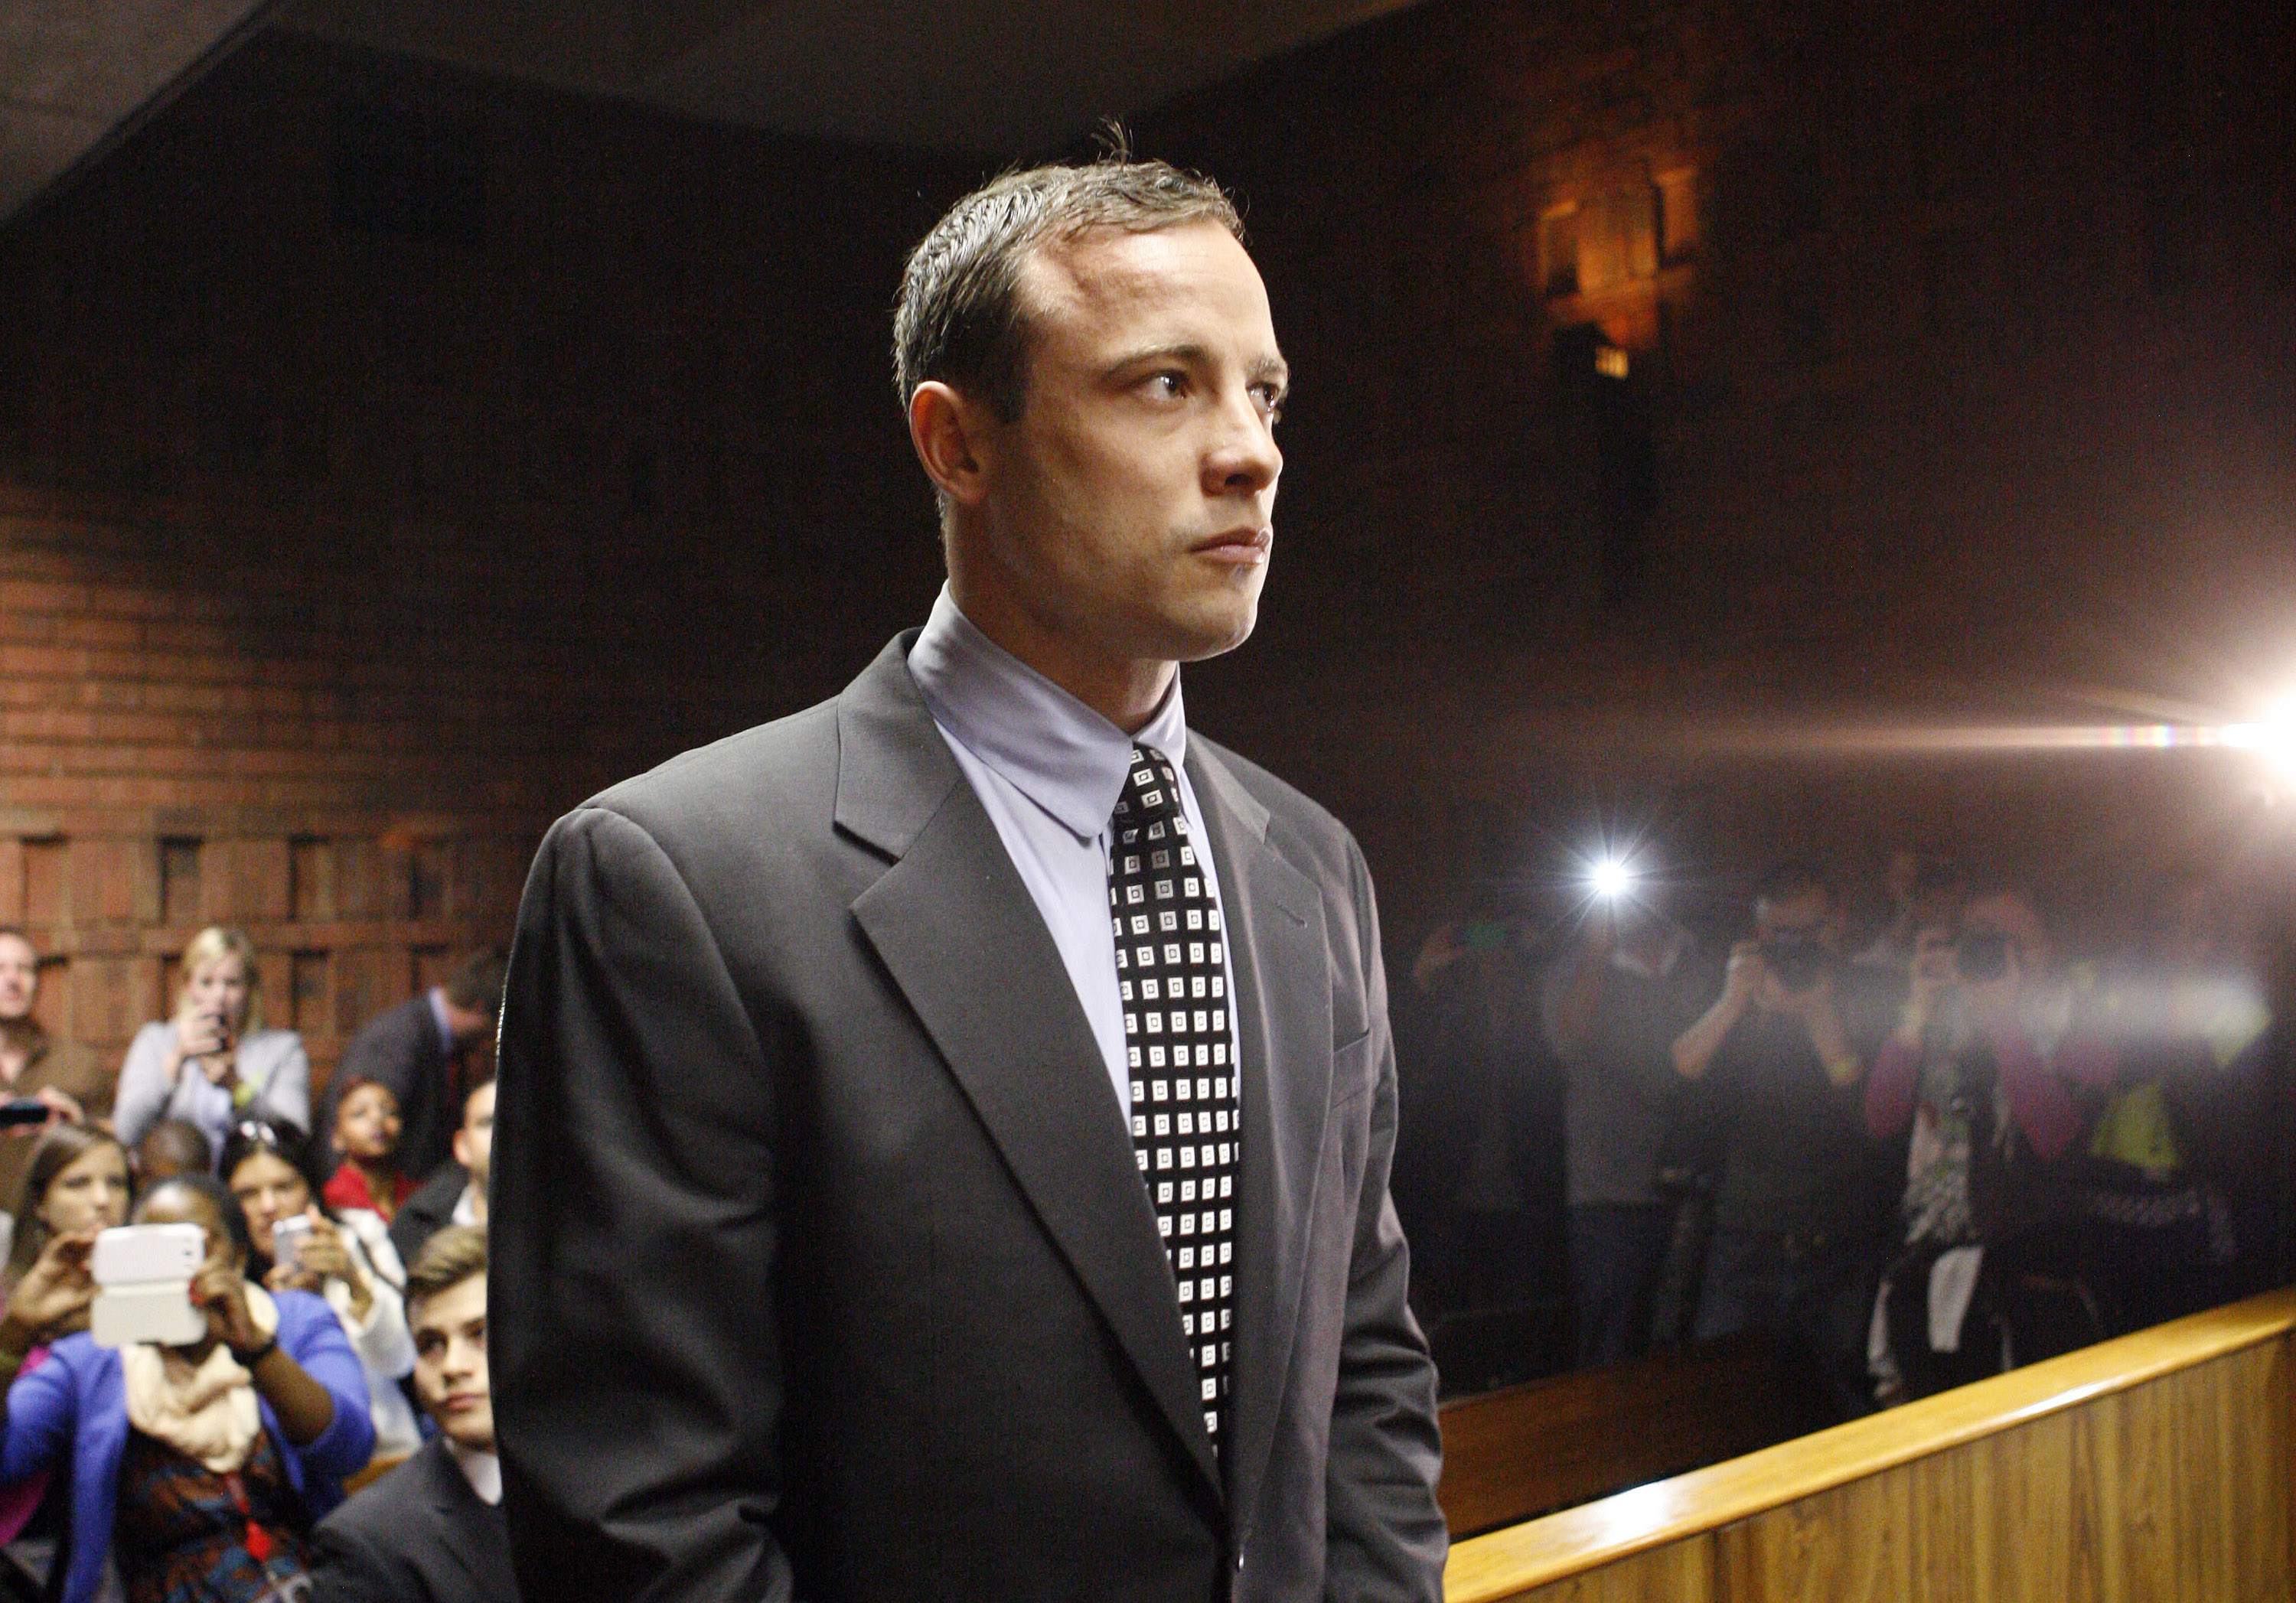 Double-amputee Olympian, Oscar Pistorius, looks on as he appears in the magistrates court in Pretoria, South Africa, Tuesday, June 4, 2013. (Themba Hadebe—AP)